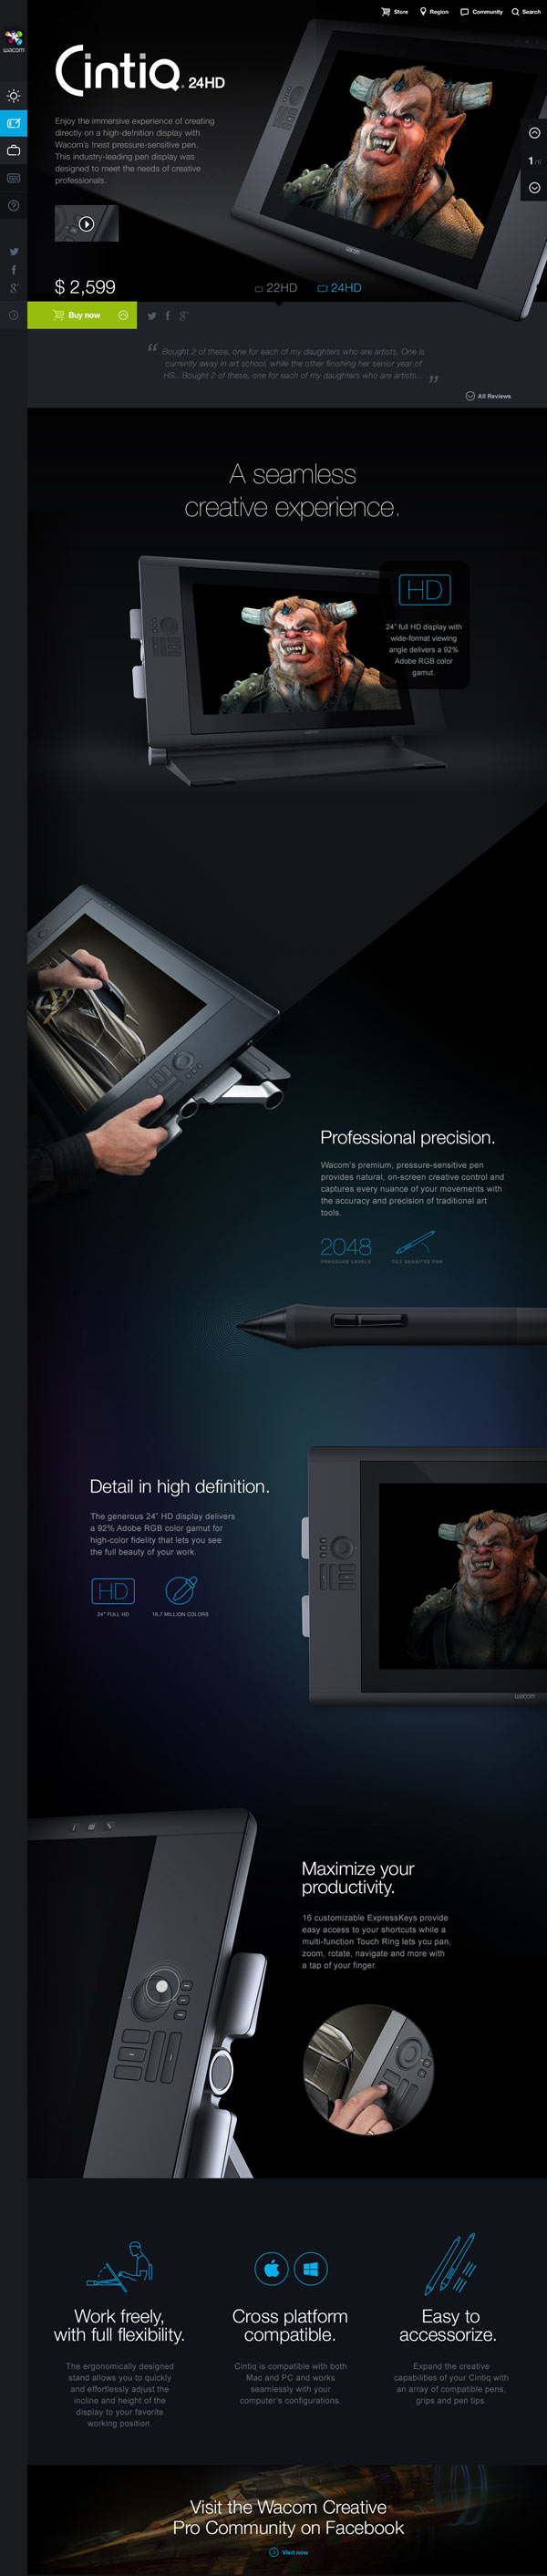 The Wacom Cintiq product page of the new redesign.